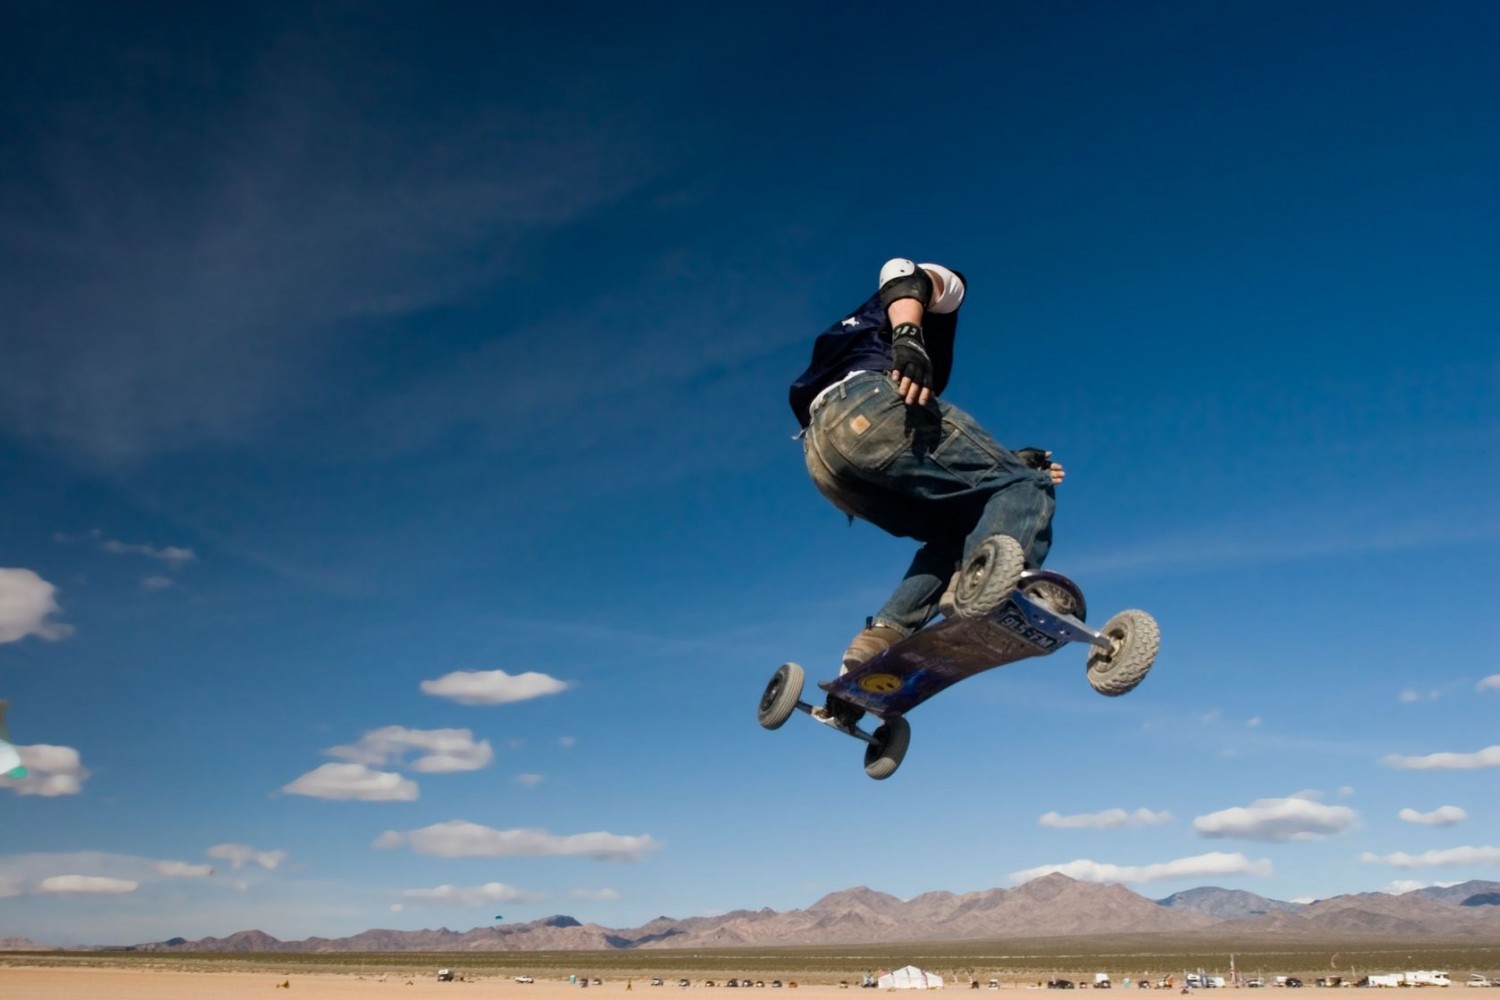 A mountainboarder in mid air with a deep blue sky